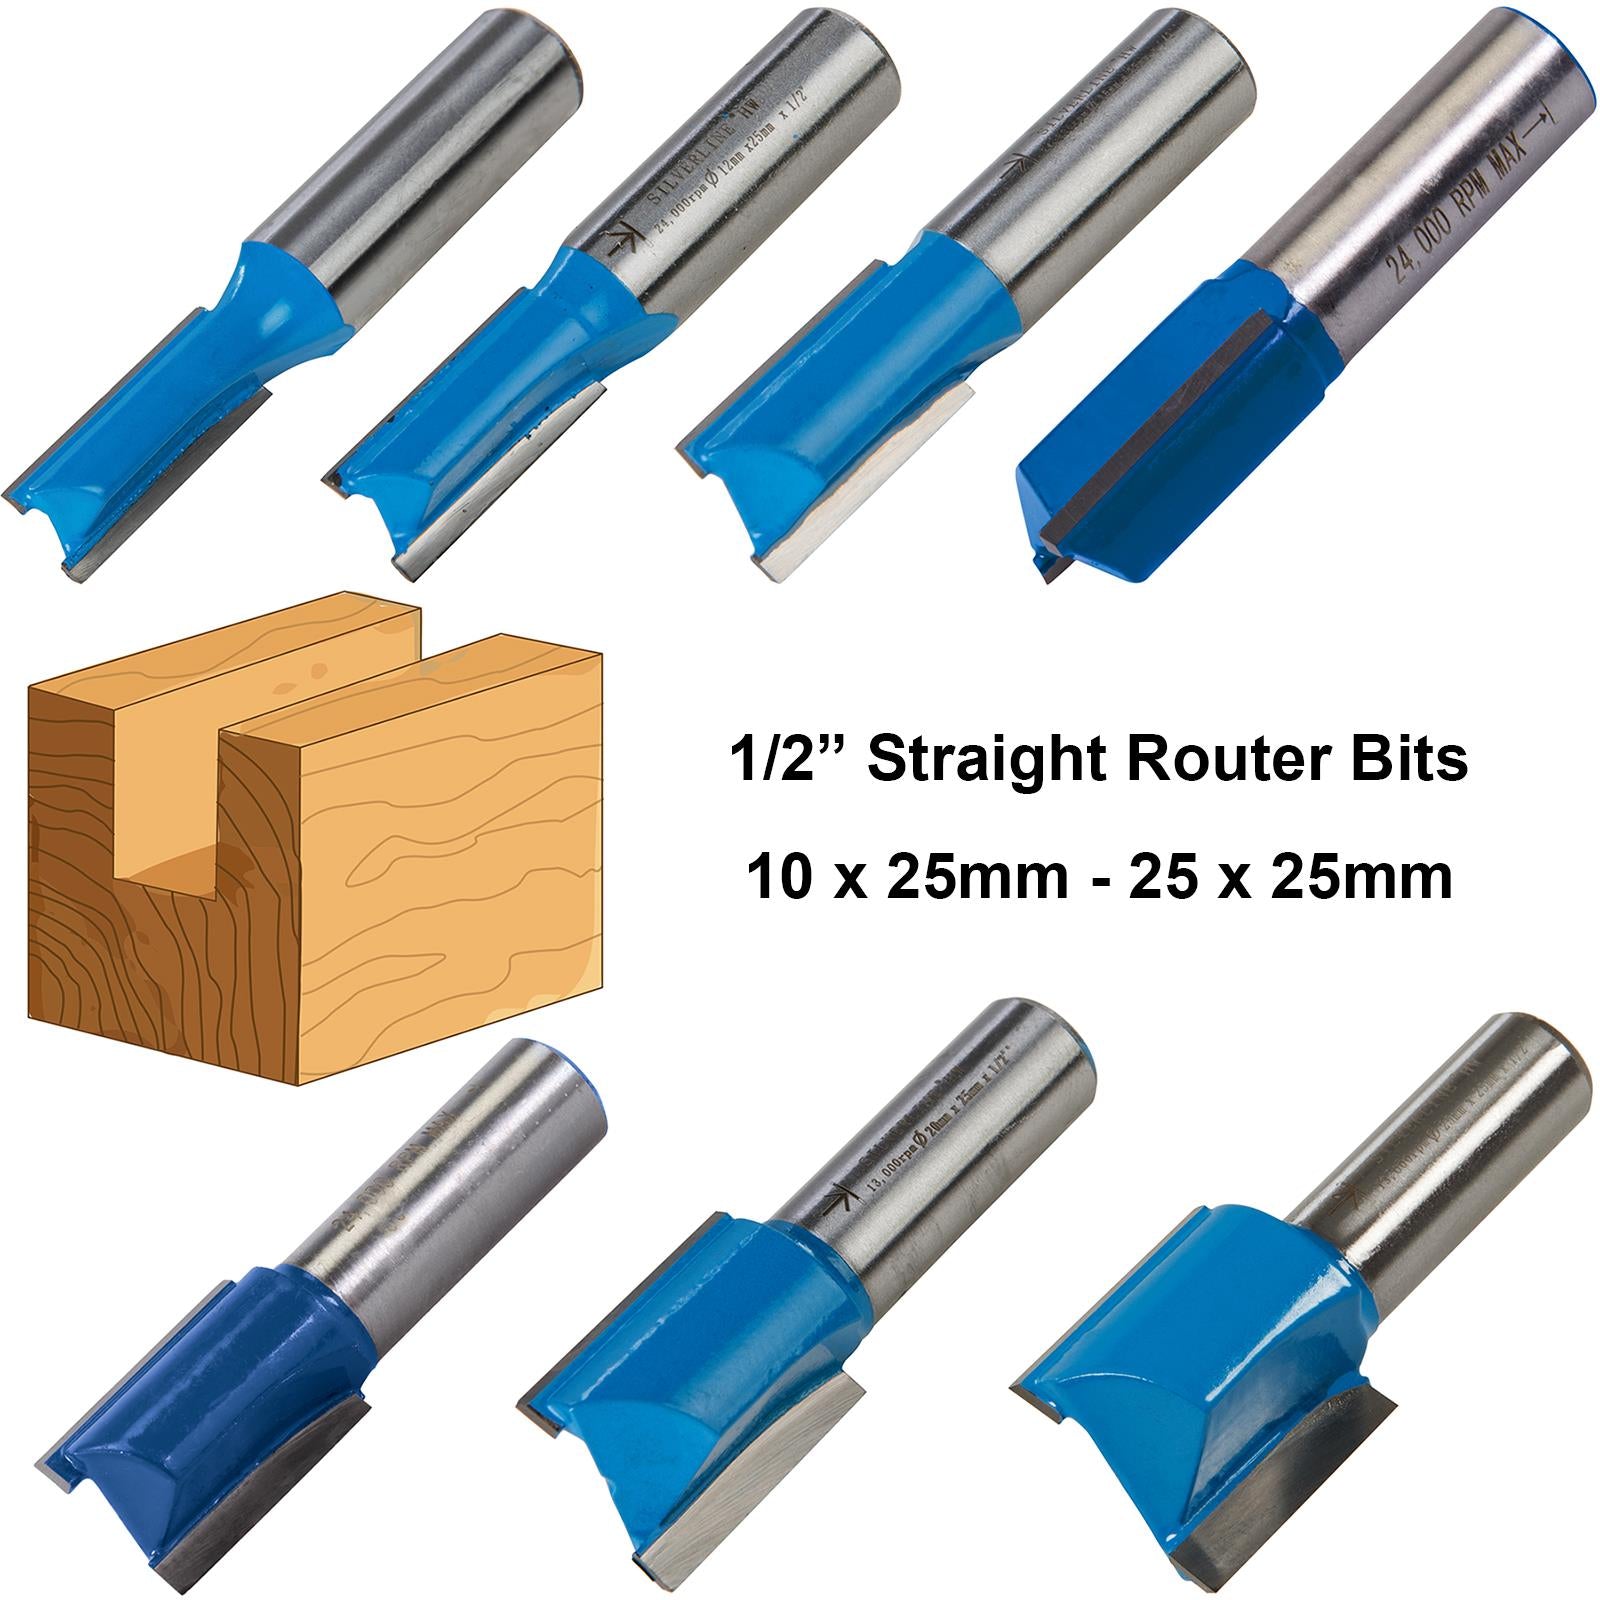 Silverline 1/2" Shank TCT Straight Metric Cutter Router Bits